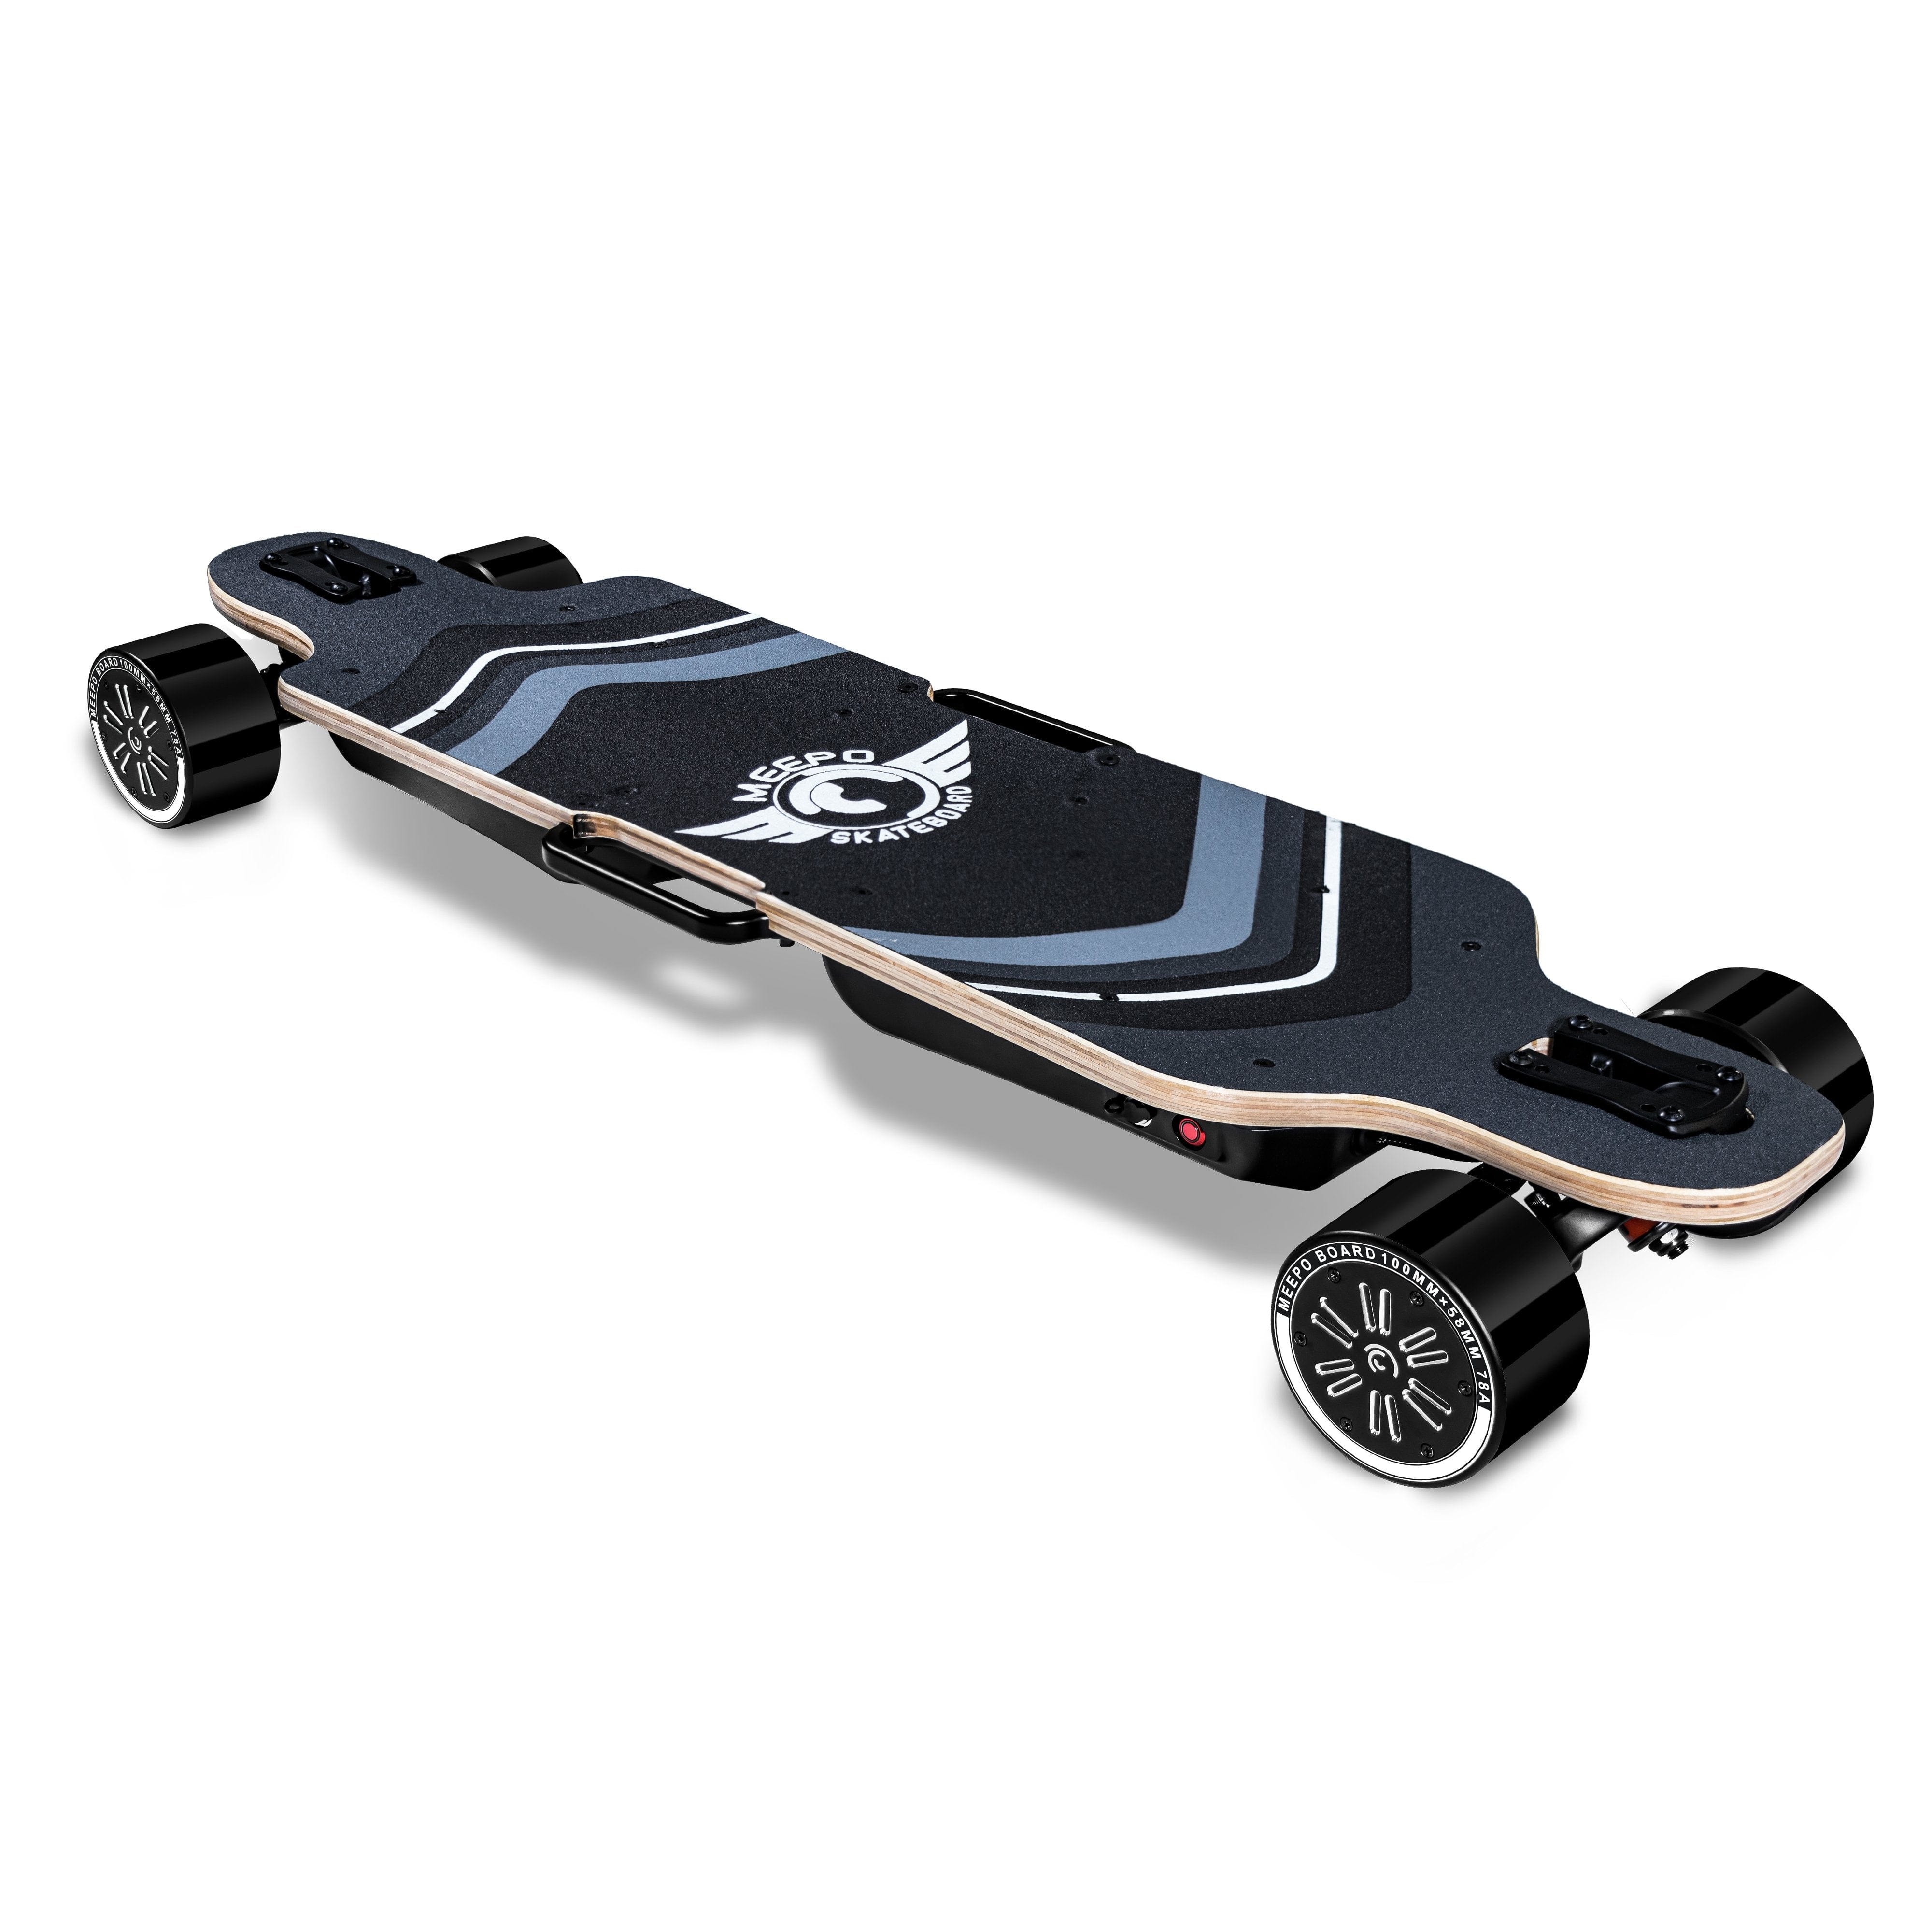 Meepo Board All Wheel Drive Electric Skateboard - Best Skateboard for Heavy Riders and Hills